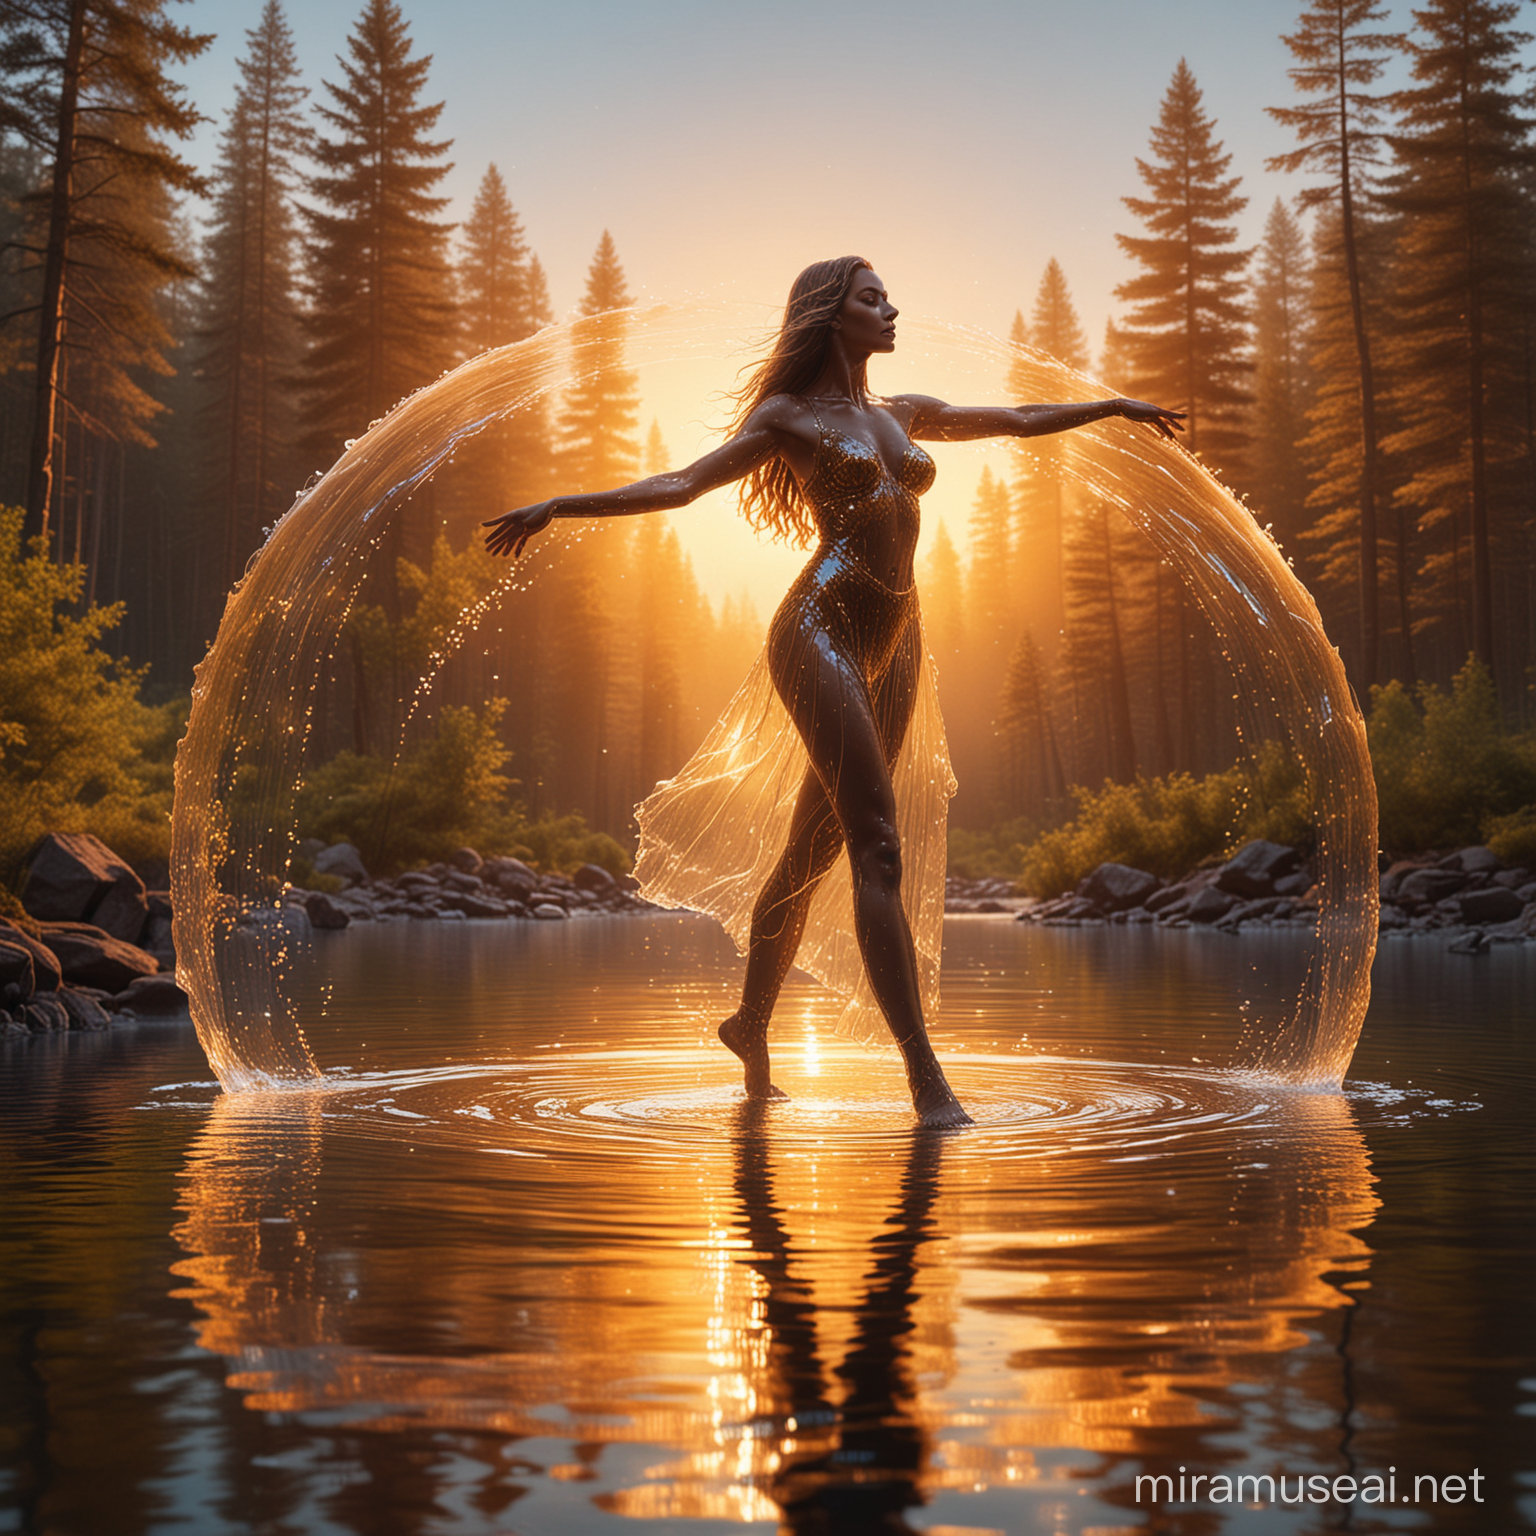 image portrays a surreal scene where a transparent woman made from neon water crystal clear, appears to be dancing on the surface of a forest during rainbow . The golden hues of the setting sun illuminate the water figure, casting an ethereal glow that highlights its fluid form. The backdrop features serene mountains and a sky transitioning from day to night. Every detail is accentuated by the reflective nature of the water, creating a harmonious blend of light and movement.
